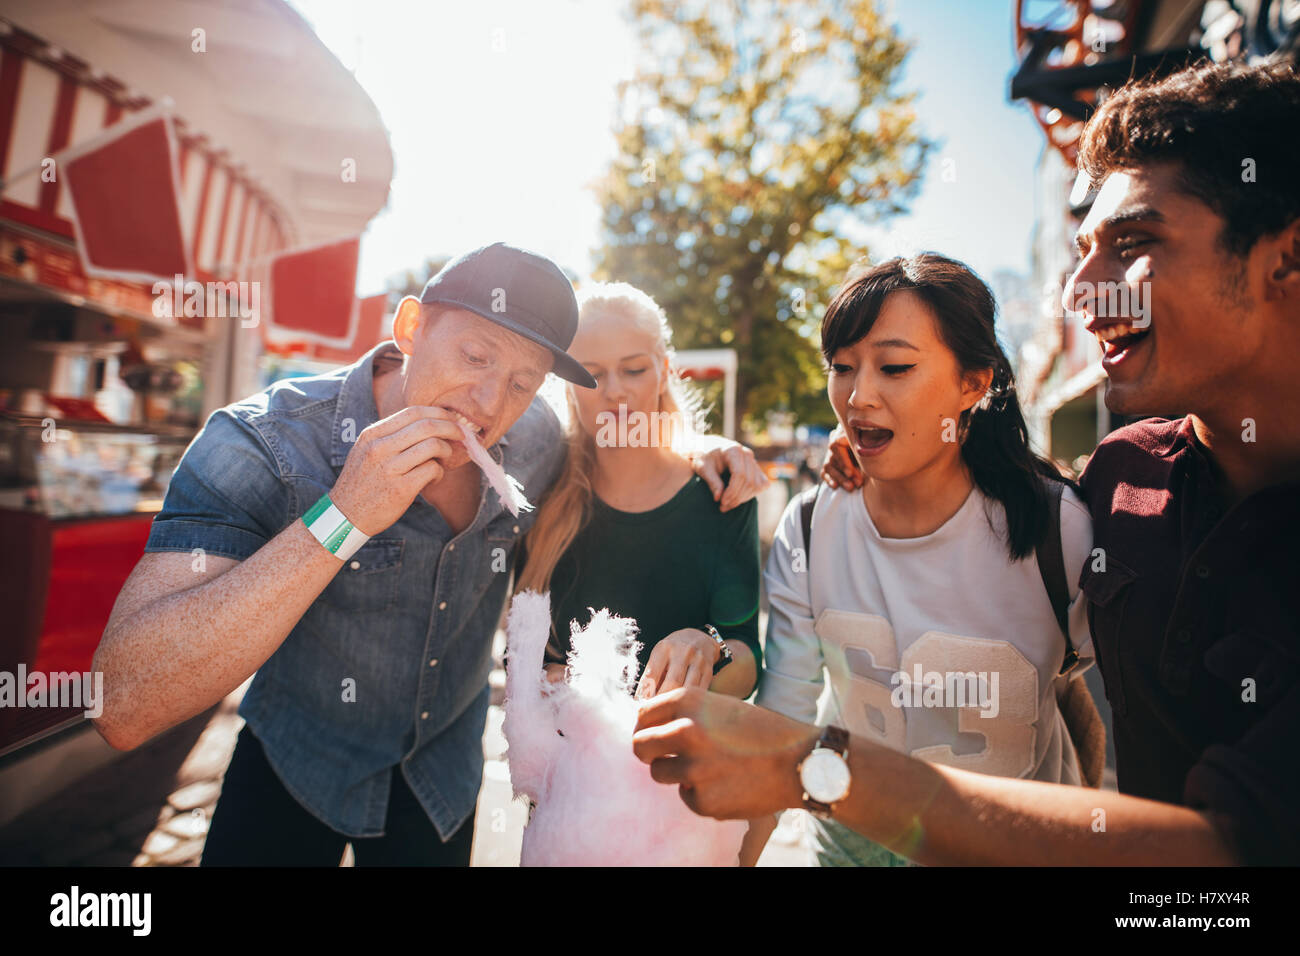 Group of friends eating cotton candy together in amusement park. Young man and women sharing cotton candyfloss at fairground. Stock Photo